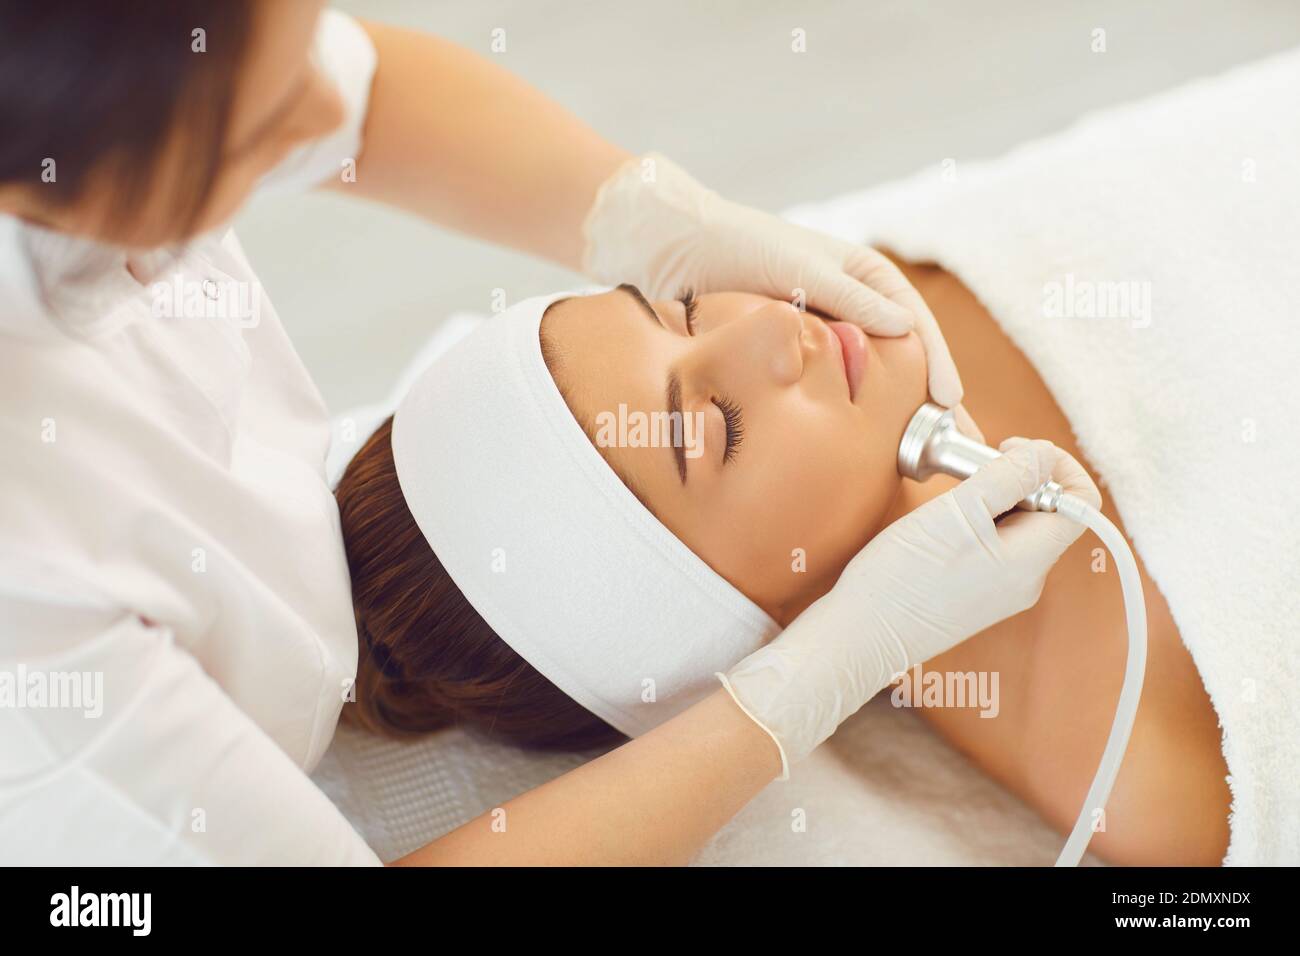 Cosmetologist making procedure of microdermabrasion of facial skin for woman Stock Photo